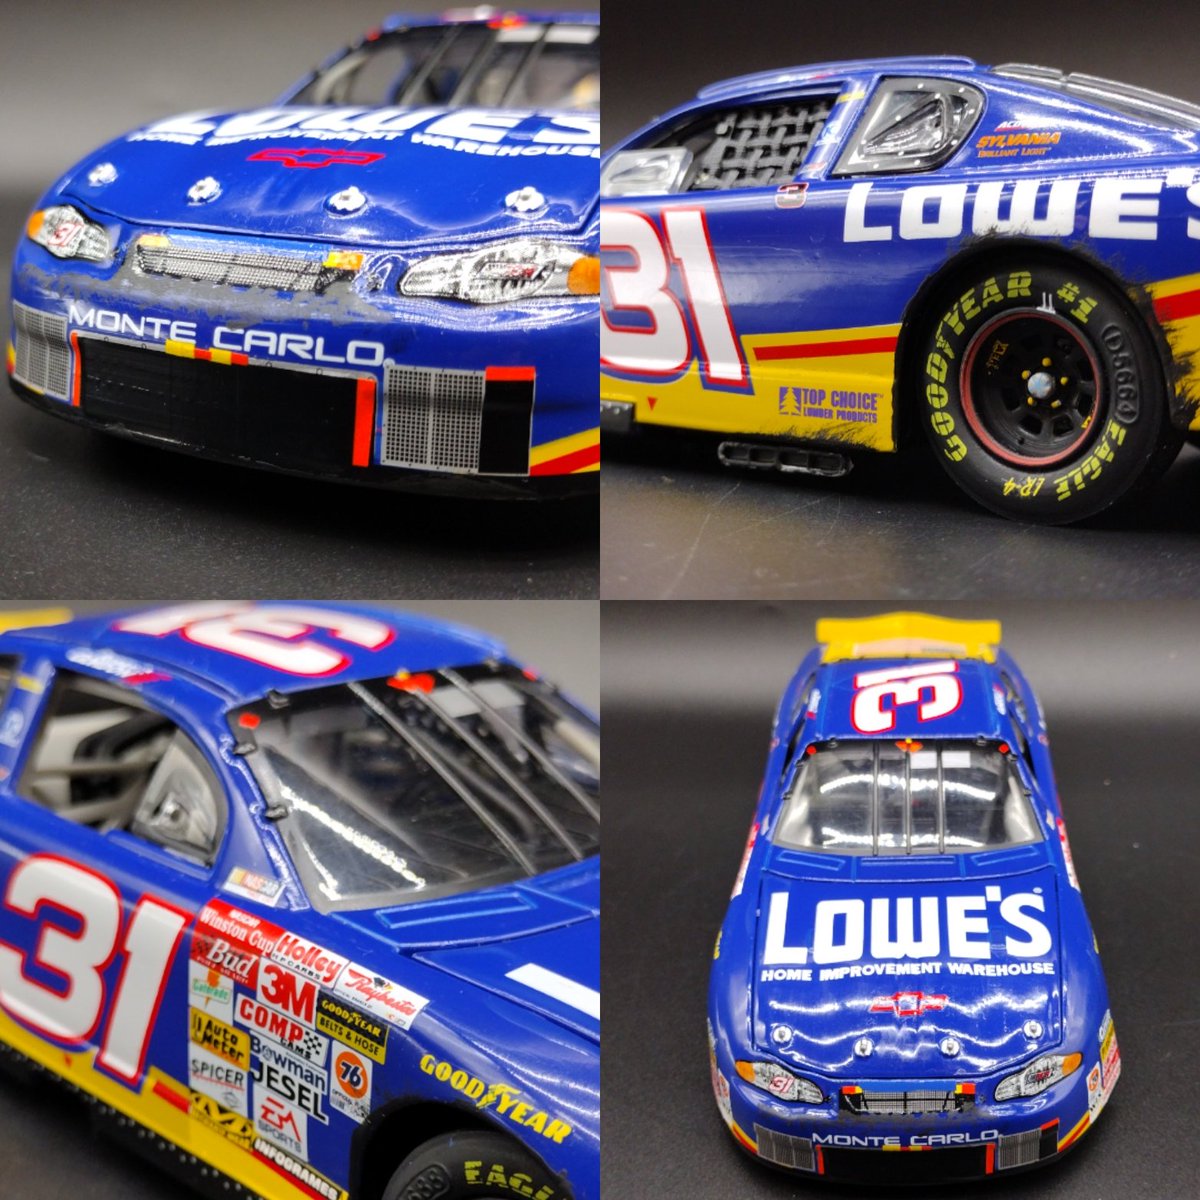 2001 Robby Gordon #31 Lowe's New Hampshire Win raced version custom. Robby's only oval win, and moved the 2001 Champion to do it.